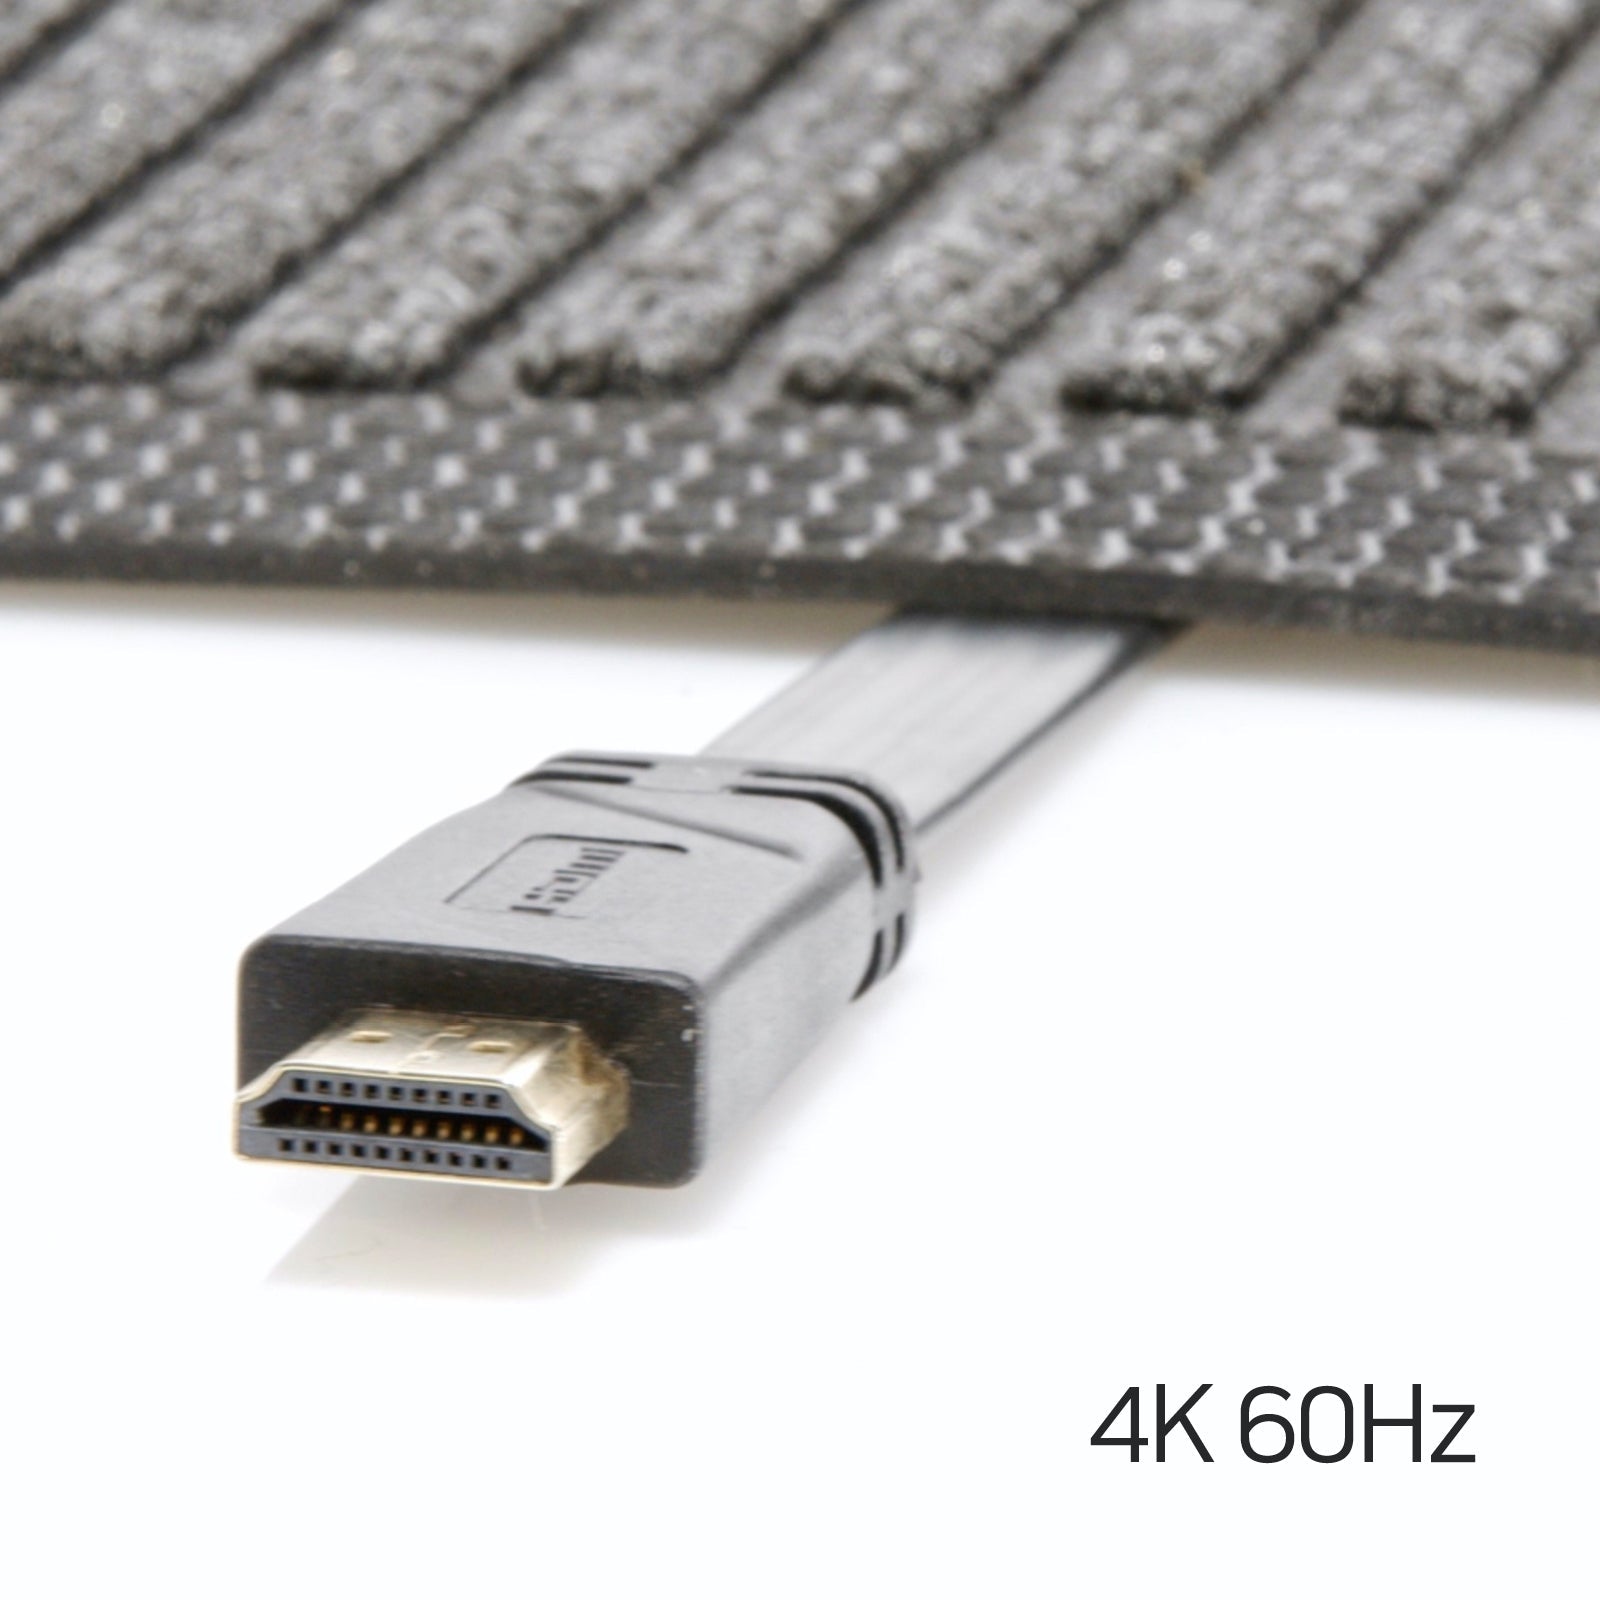 2m HDMI Flat Cable